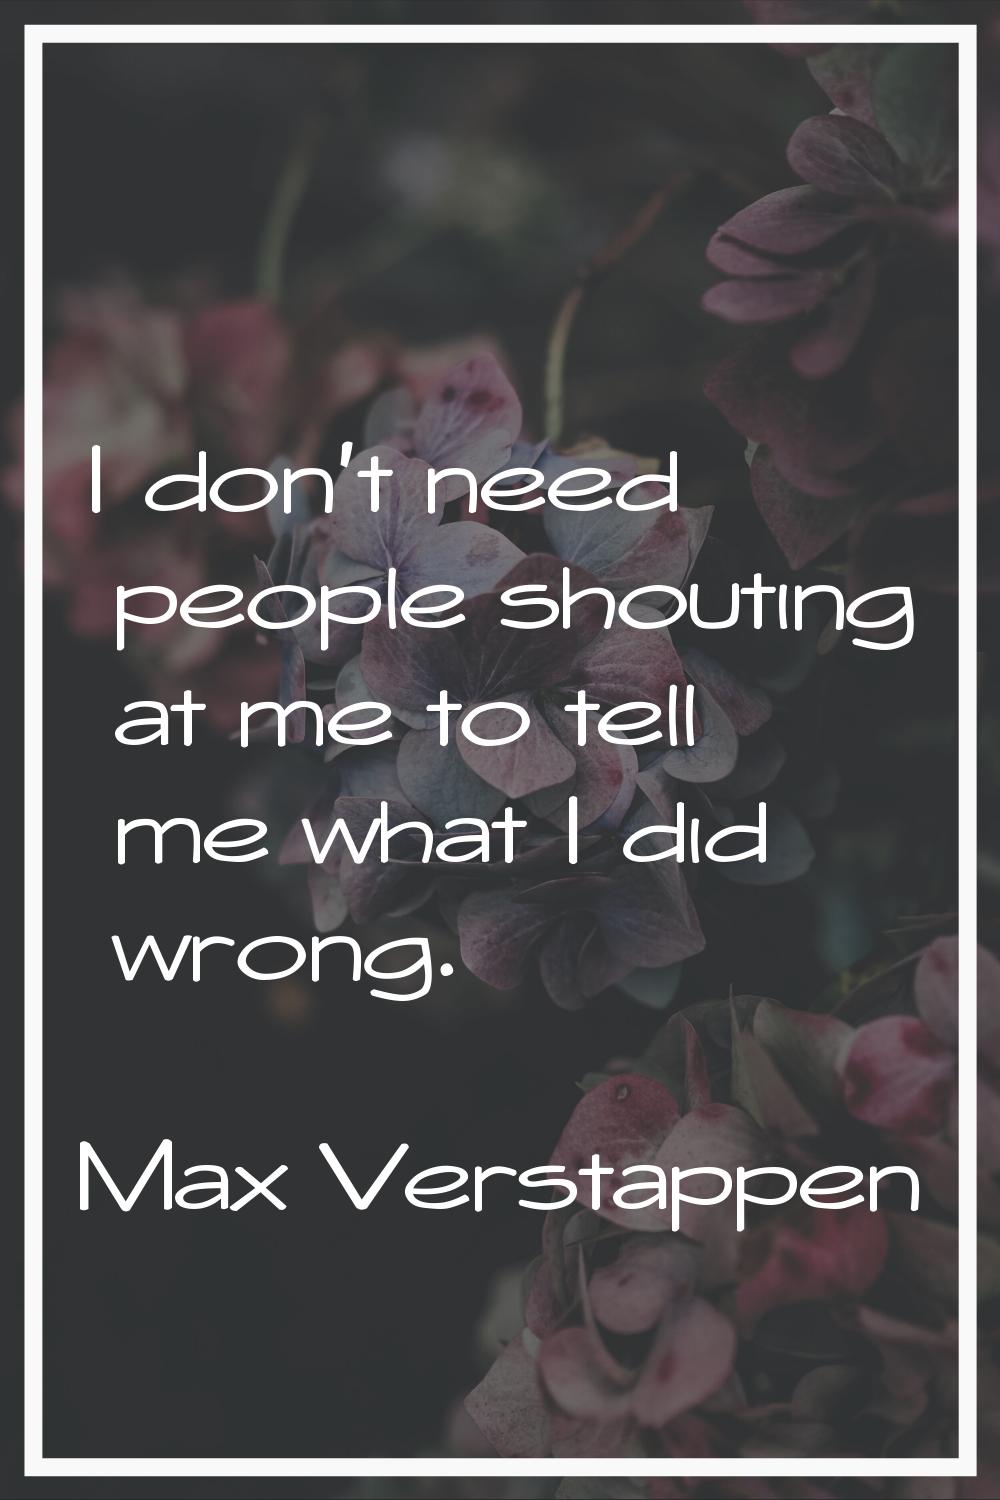 I don't need people shouting at me to tell me what I did wrong.